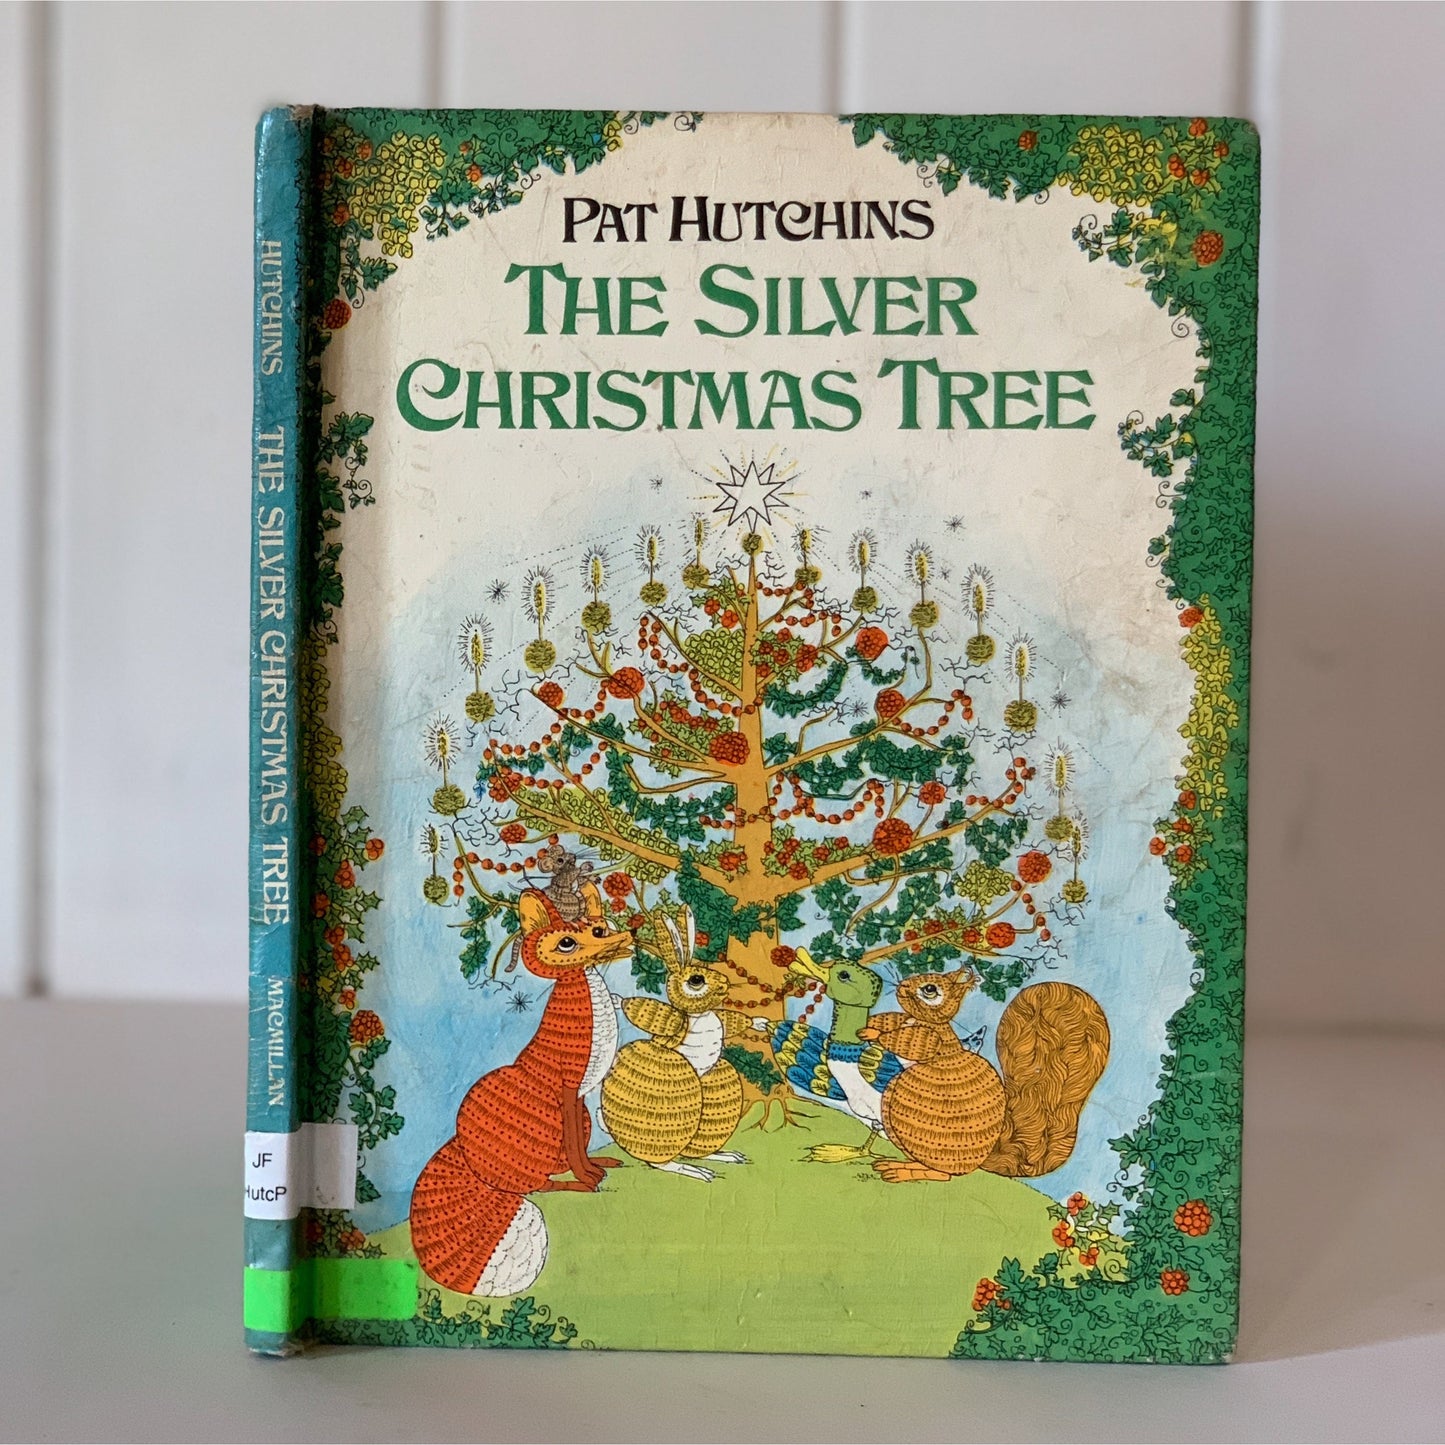 The Silver Christmas Tree, 1974 Hardcover, Pat Hutchins